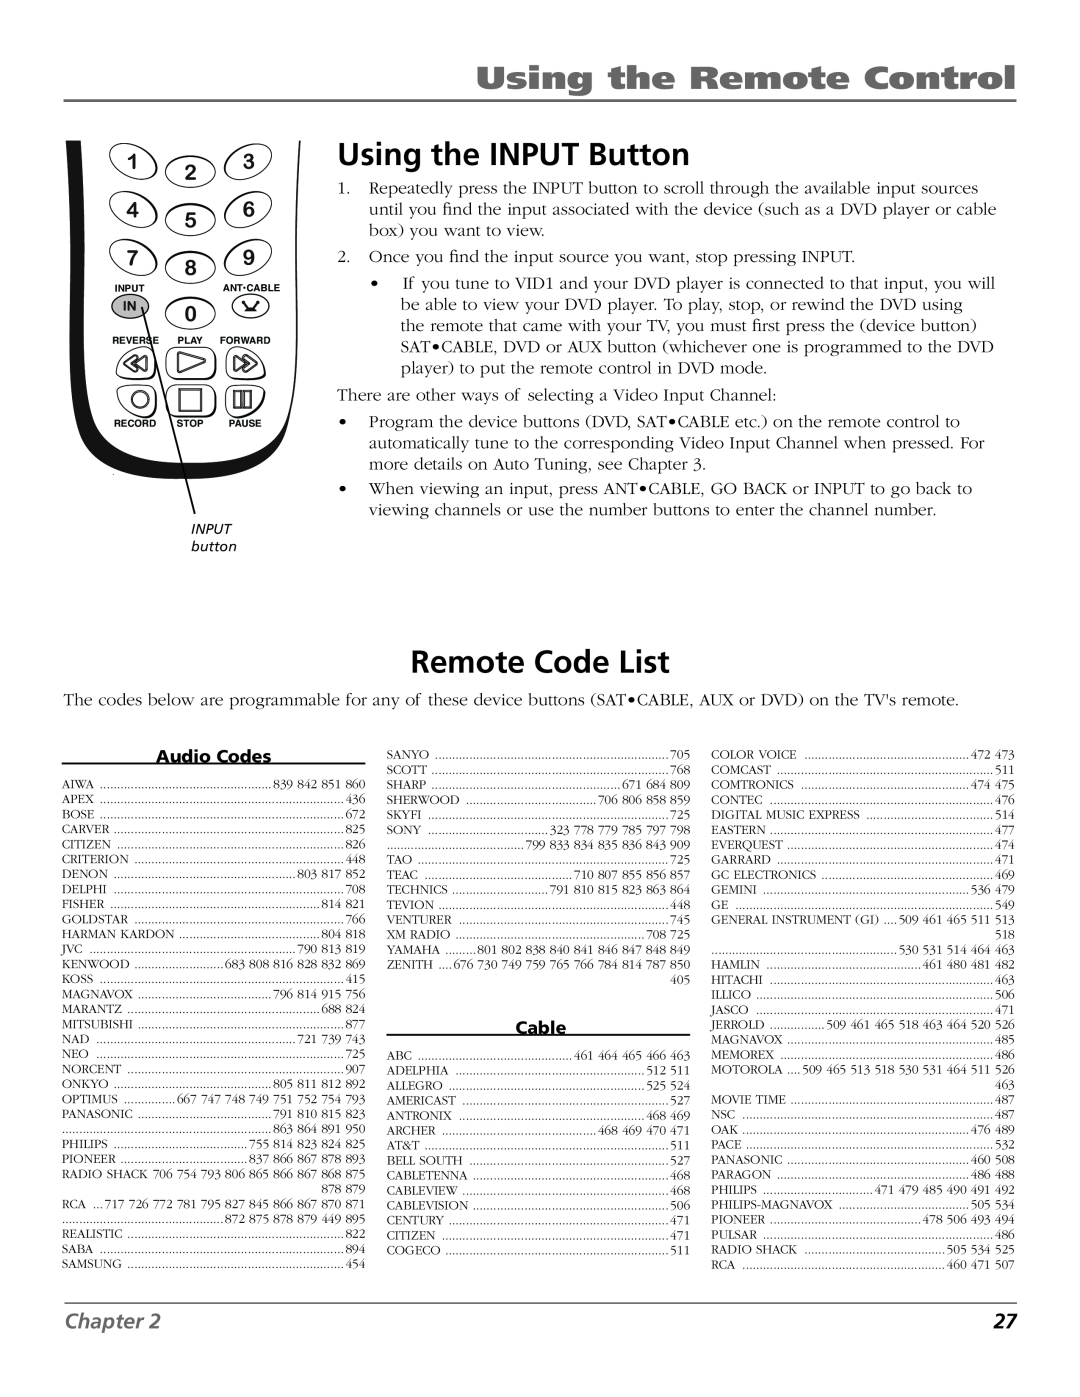 RCA R52WH79 manual Using the INPUT Button, Remote Code List, Audio Codes, Cable, Using the Remote Control, Chapter 